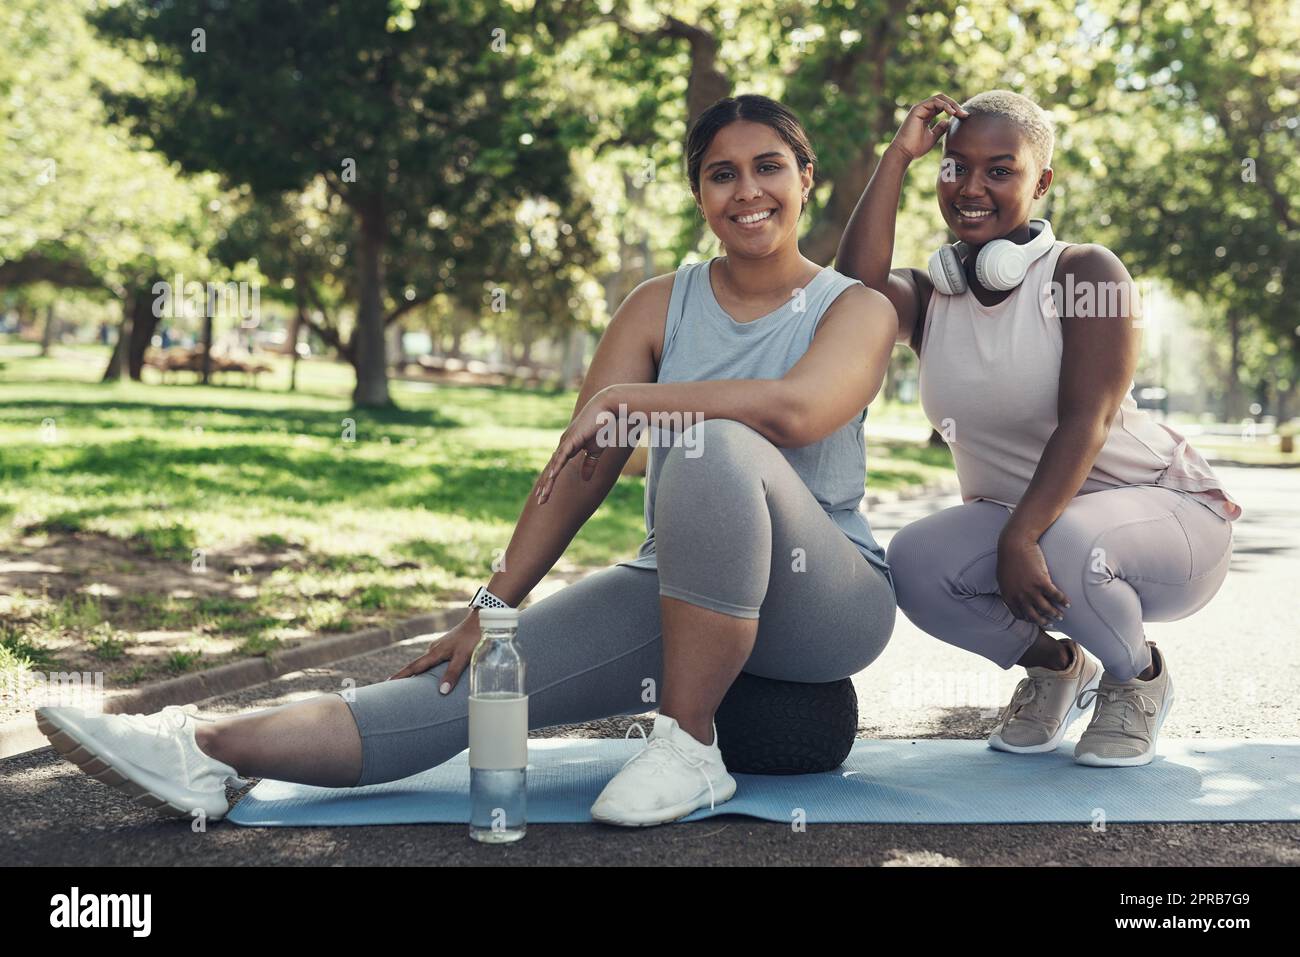 Working out with my best friend. two friends taking a break during their workout. Stock Photo